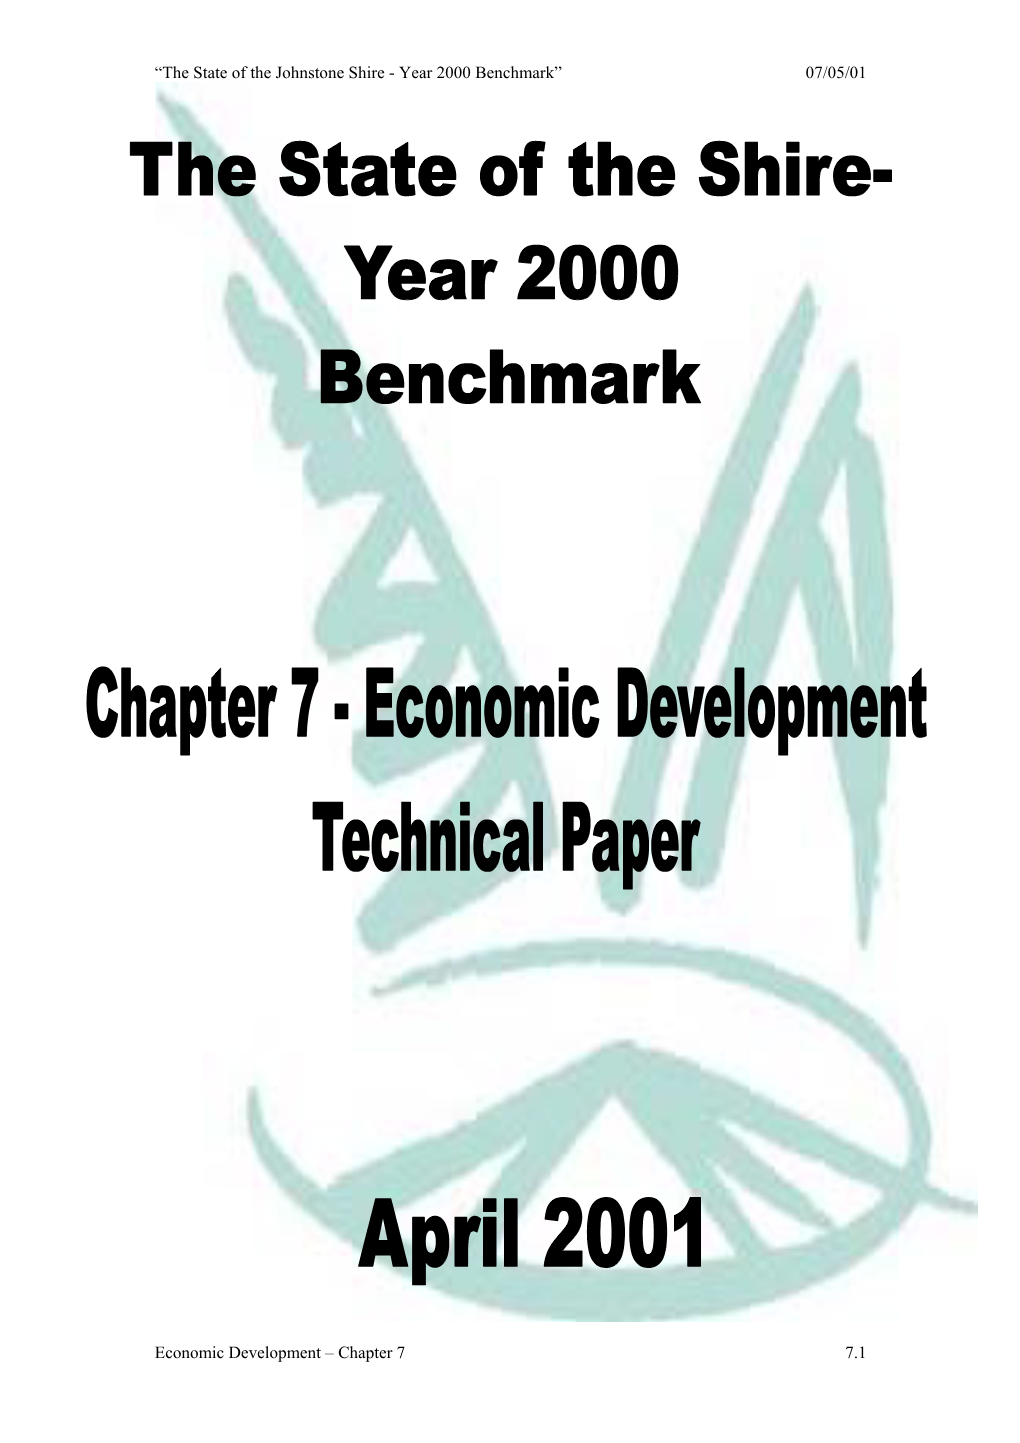 The State of the Johnstone Shire - Year 2000 Benchmark” 07/05/01